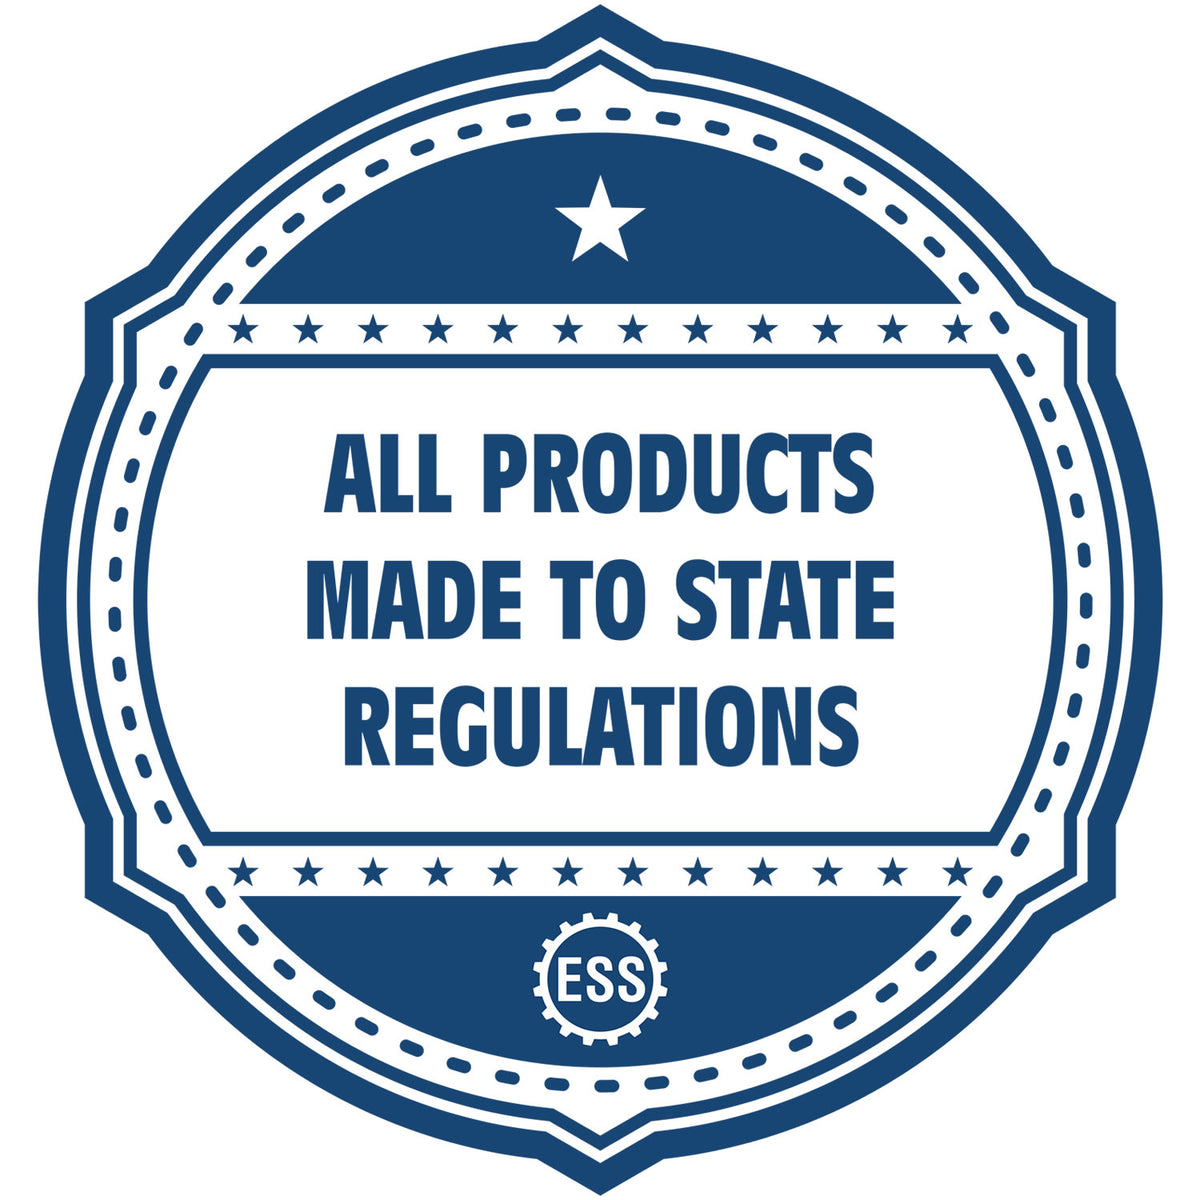 An icon or badge element for the Wooden Handle Montana State Seal Notary Public Stamp showing that this product is made in compliance with state regulations.